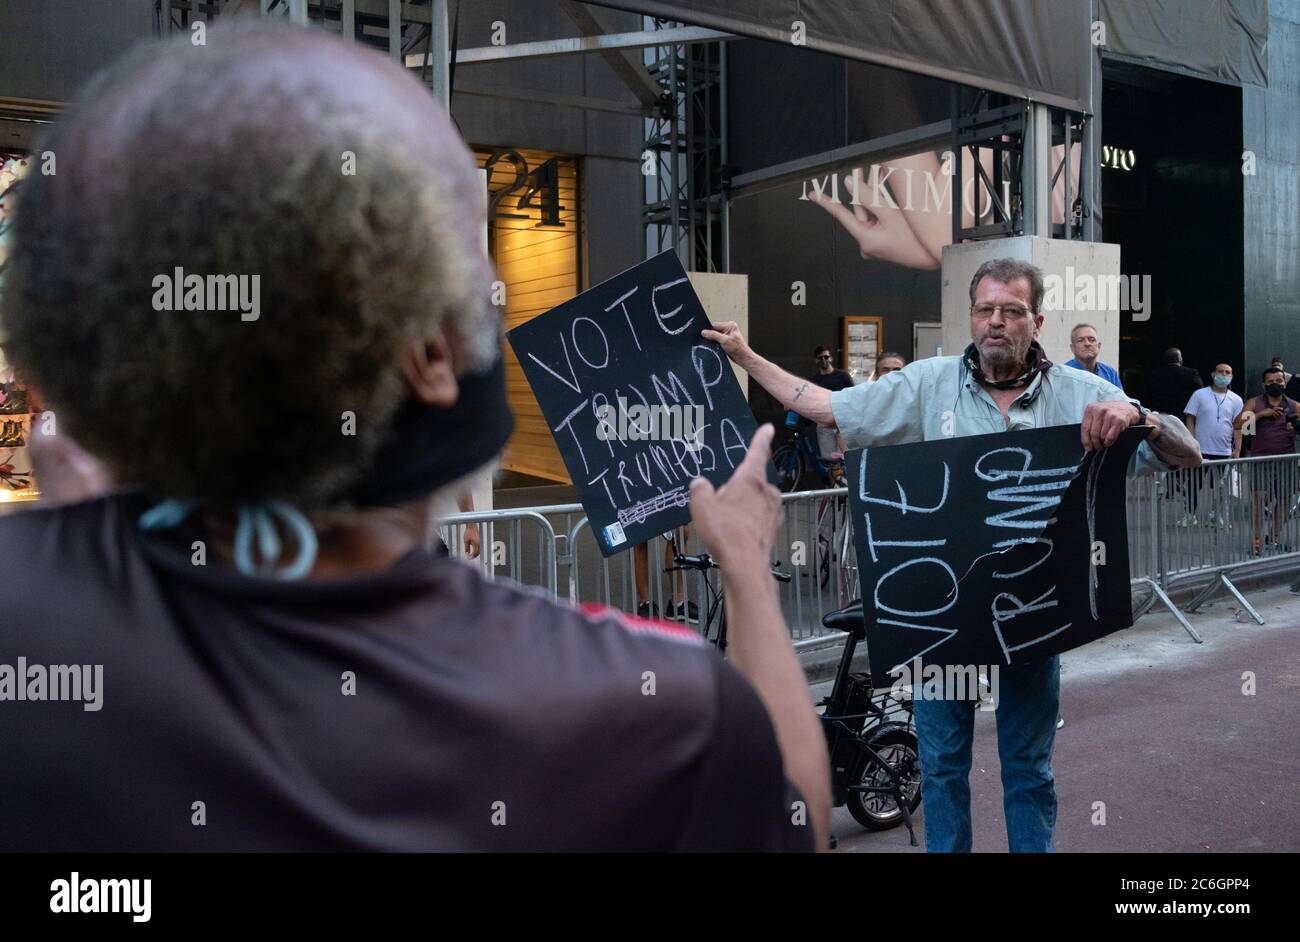 New York, United States. 08th July, 2020. A BLM protester argues with a Trump Supporter in front of Trump Tower where a large Black Lives Matter mural was paintedAs New York City enters phase 3 of reopening retail stores for indoor shopping, restaurants have been postponed for indoor dinning. Meanwhile Black Lives Matter protests continue in the city as the Mayor along with a group of people painted a large Black Lives Matter mural in front of Trump Tower on 5th Ave. Credit: SOPA Images Limited/Alamy Live News Stock Photo